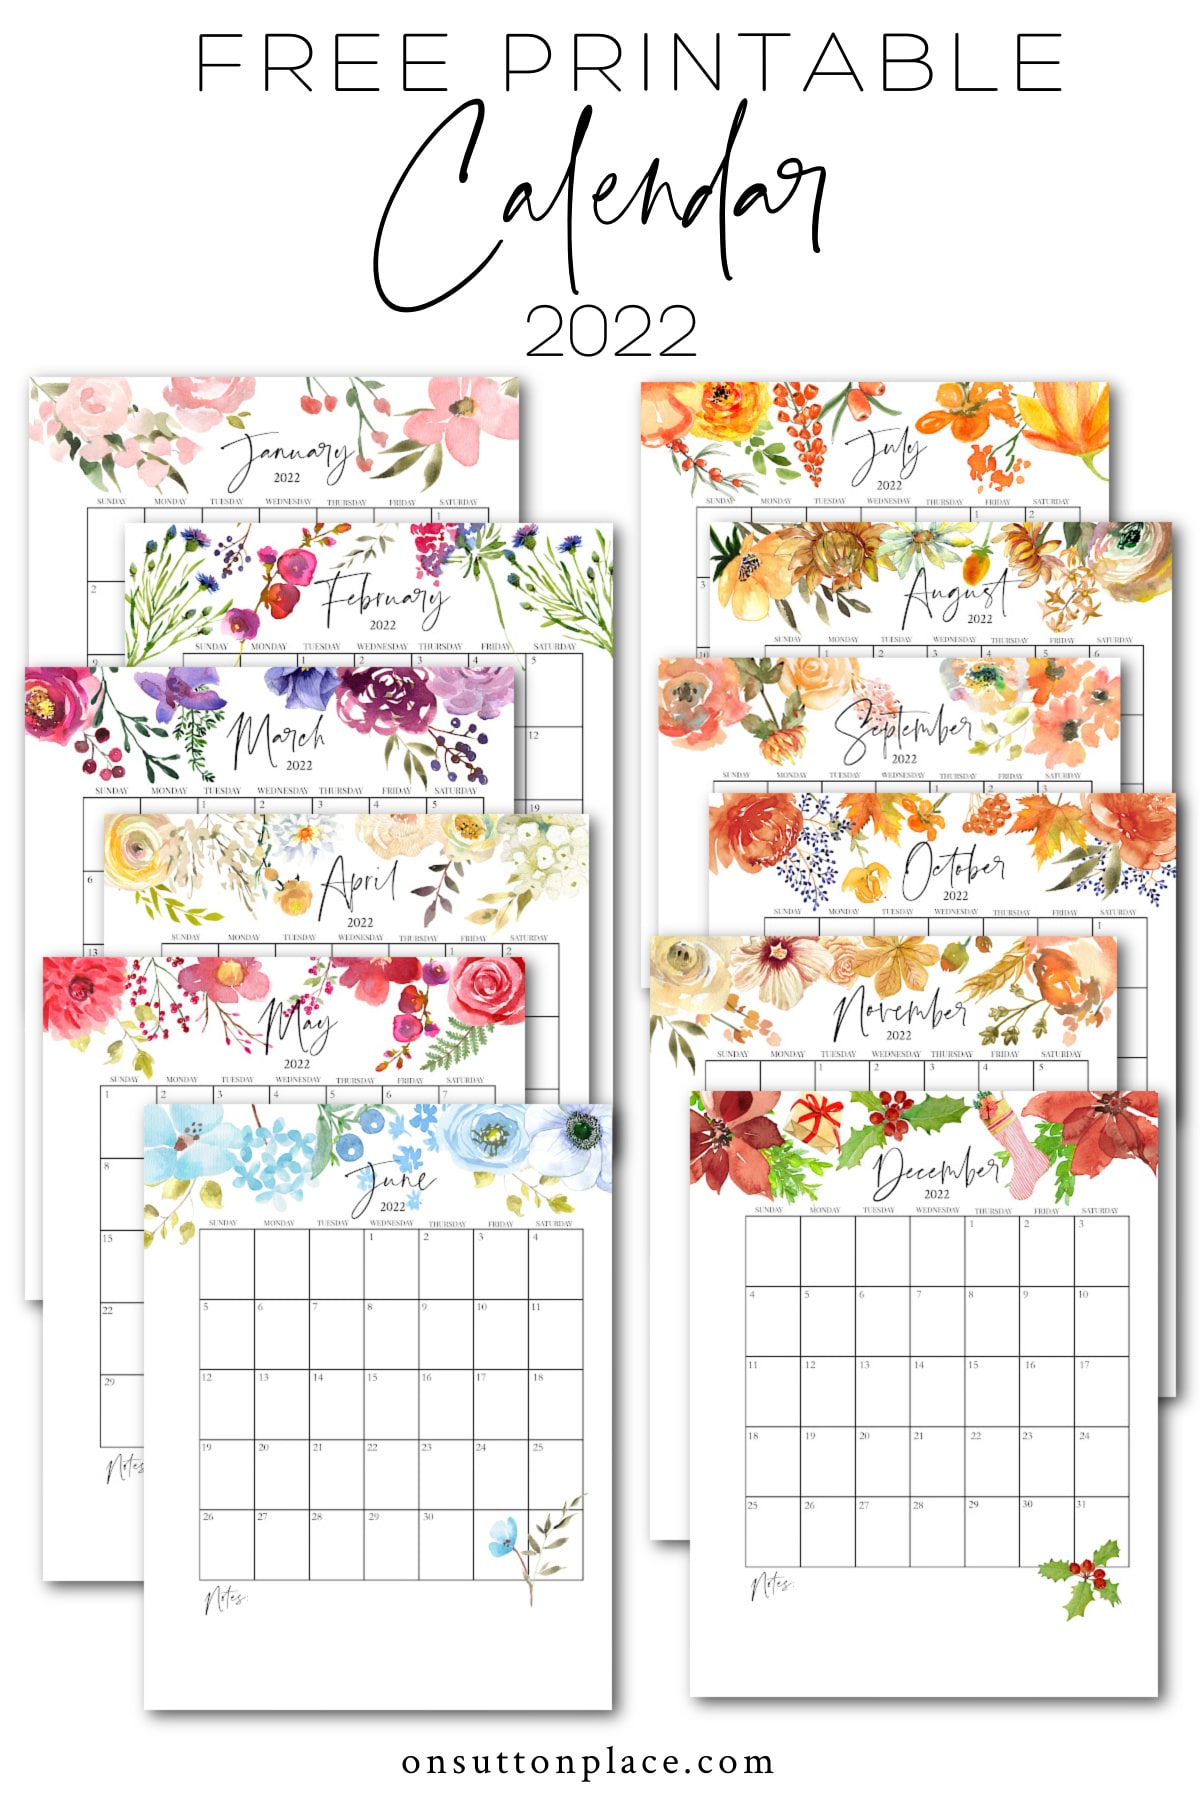 Small Printable Calendar 2022 50+ Of The Best 2022 Free Printable Calendars - The Turquoise Home